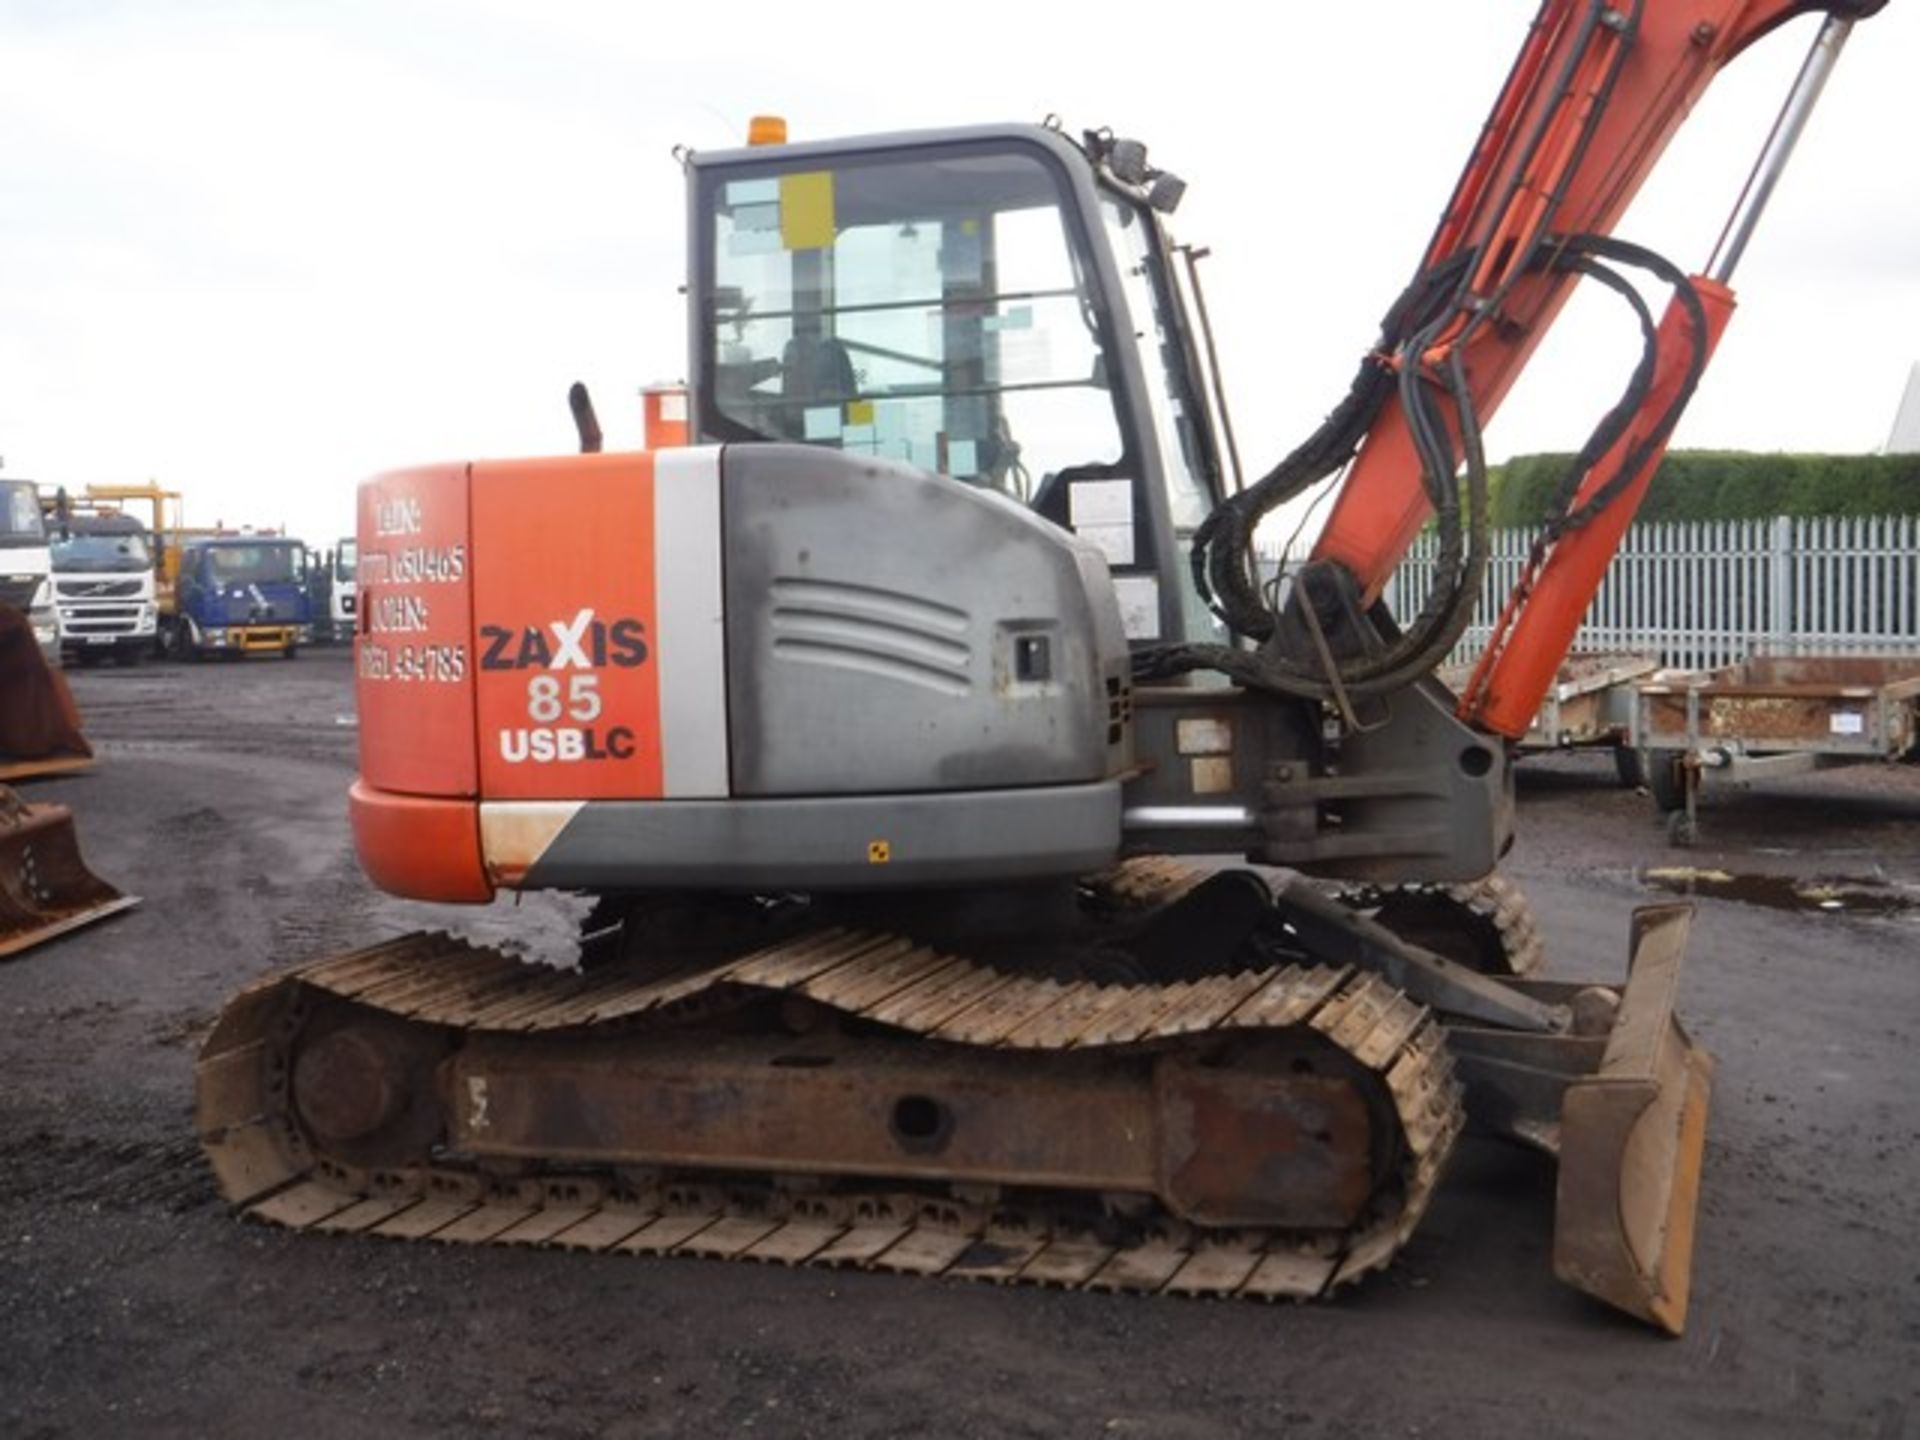 2009 HITACHI 360 EXCAVATOR ZAXIS 85 C/W 3 BUCKETS AND QUICK HITCH 6441HRS (NOT VERIFIED) - Image 11 of 27